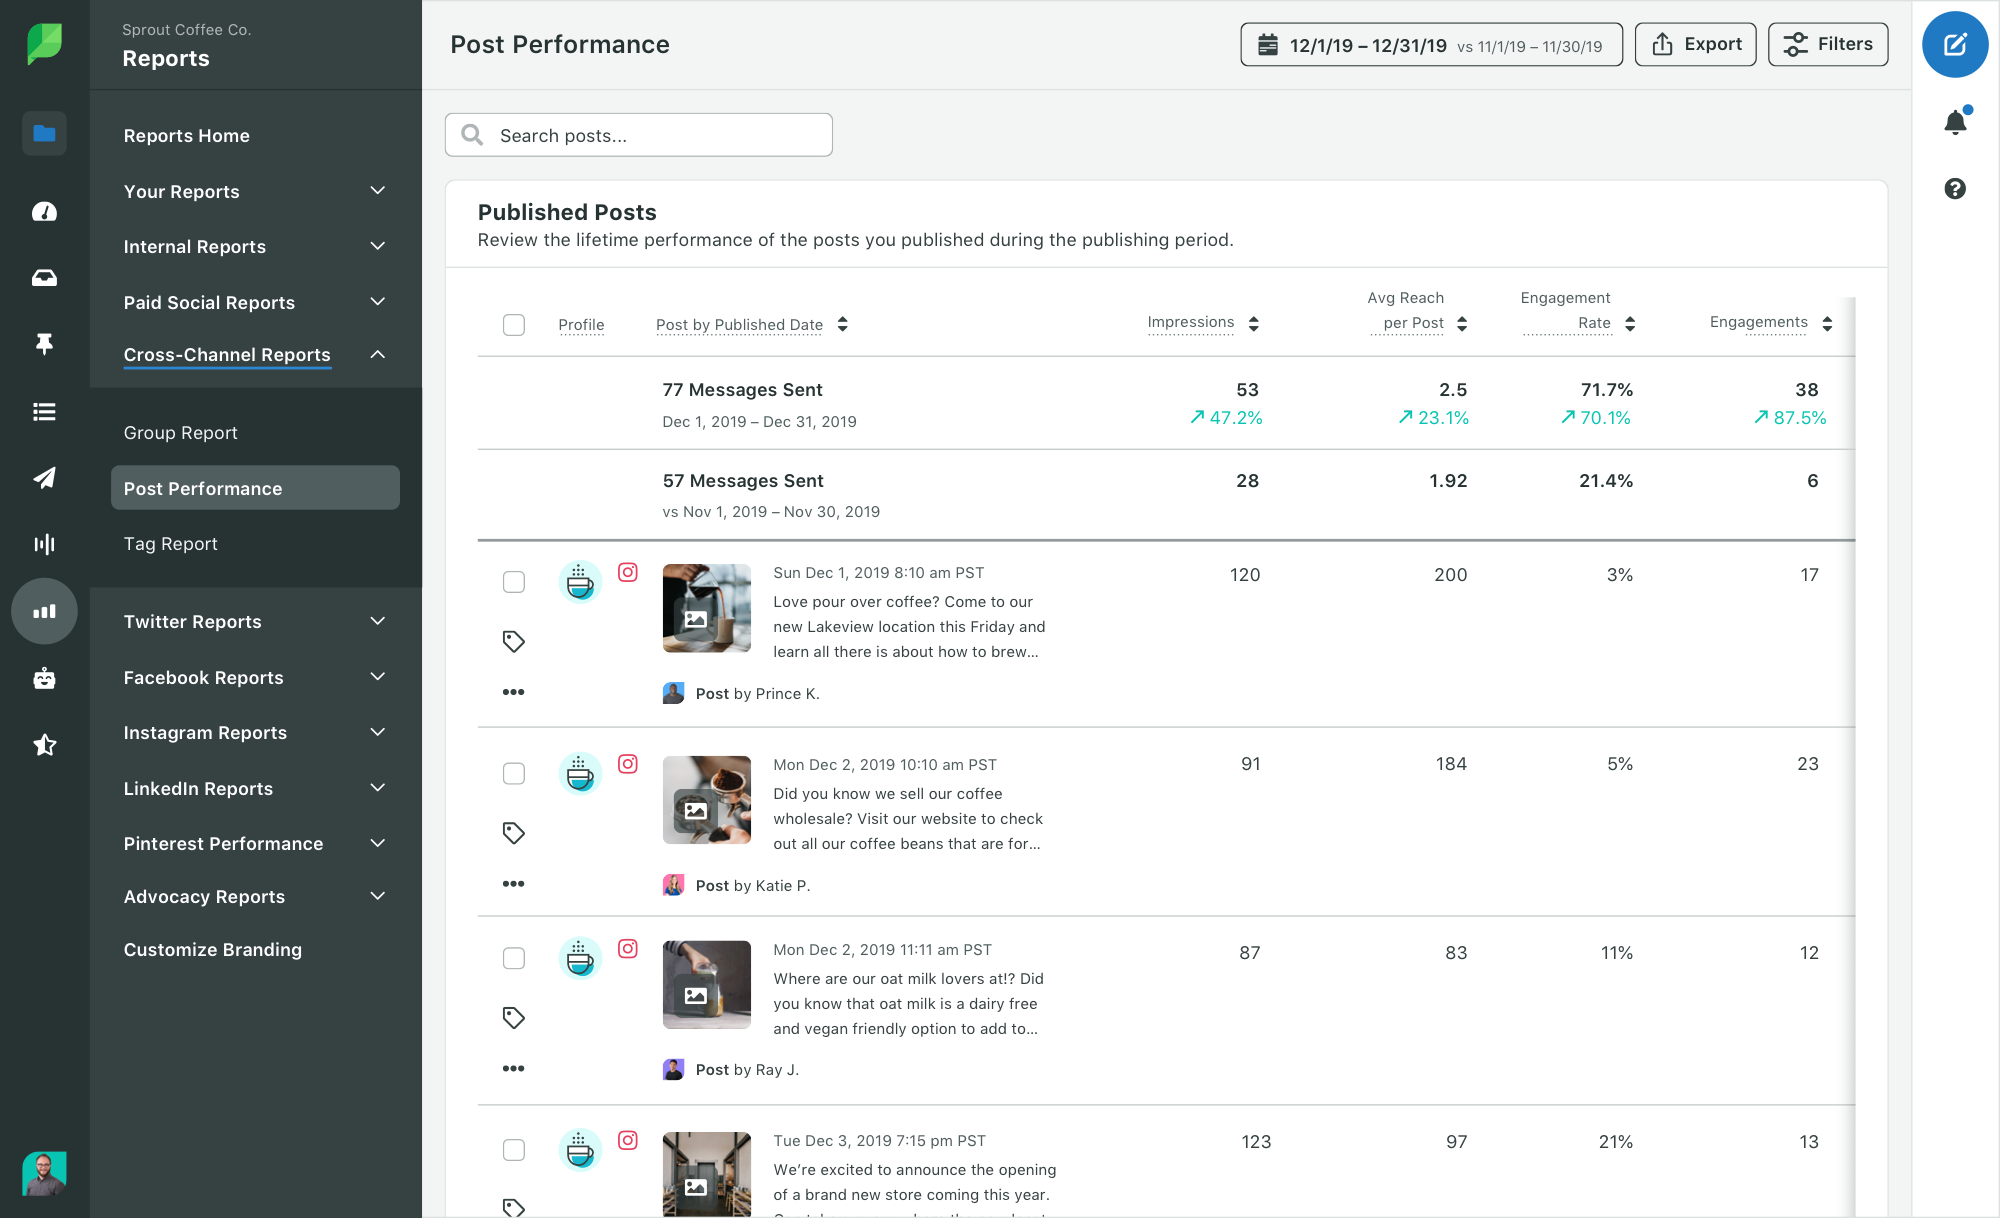 Sprout Social's Post Performance Report shows valuable metrics across your social profiles.